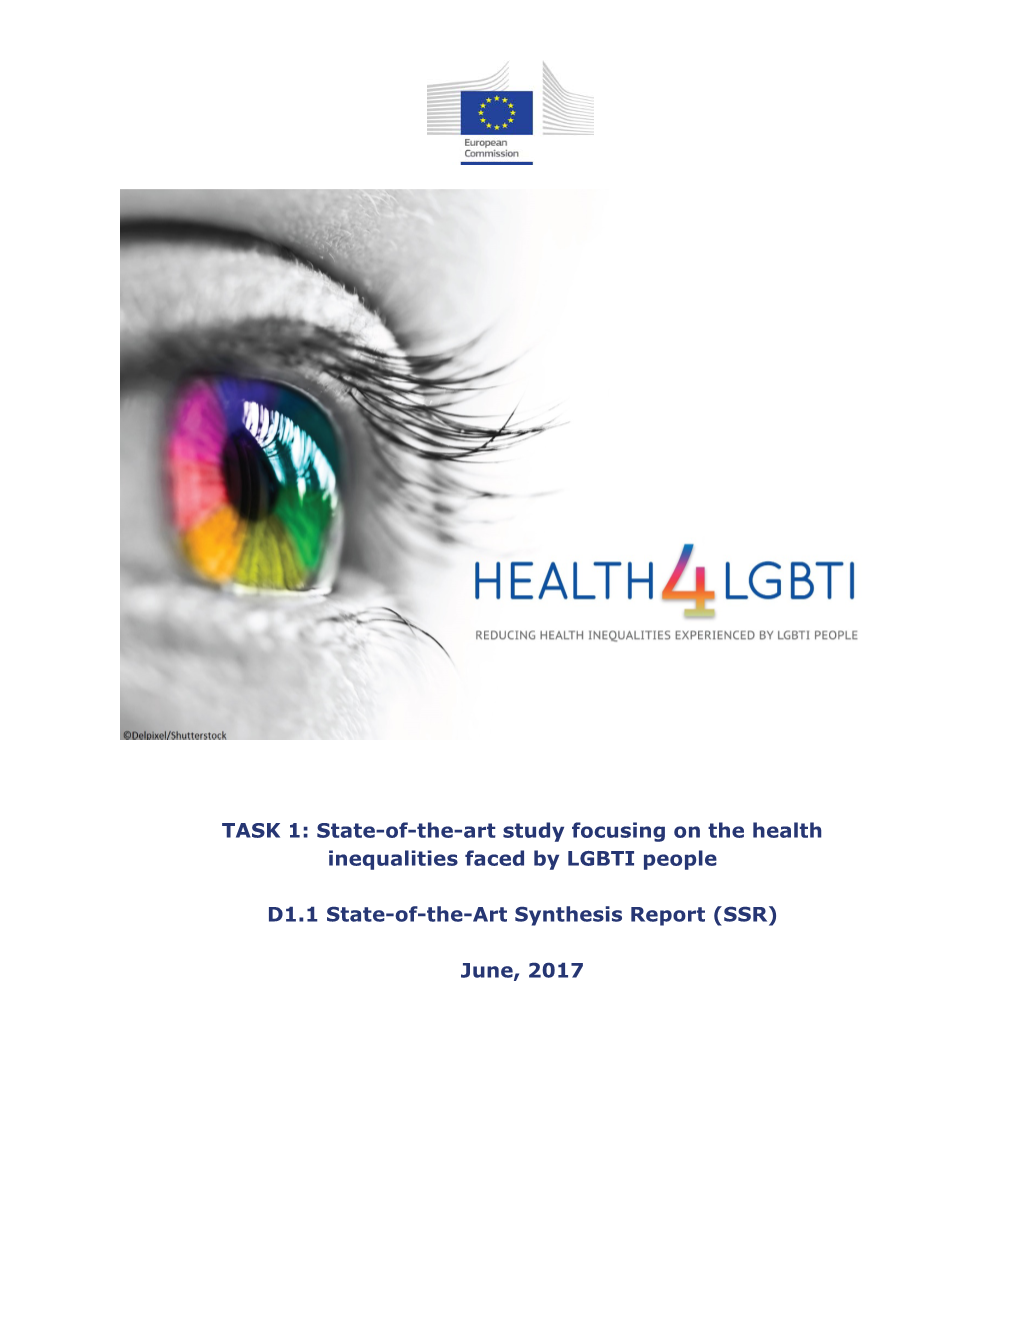 State-Of-The-Art Study Focusing on the Health Inequalities Faced by LGBTI People